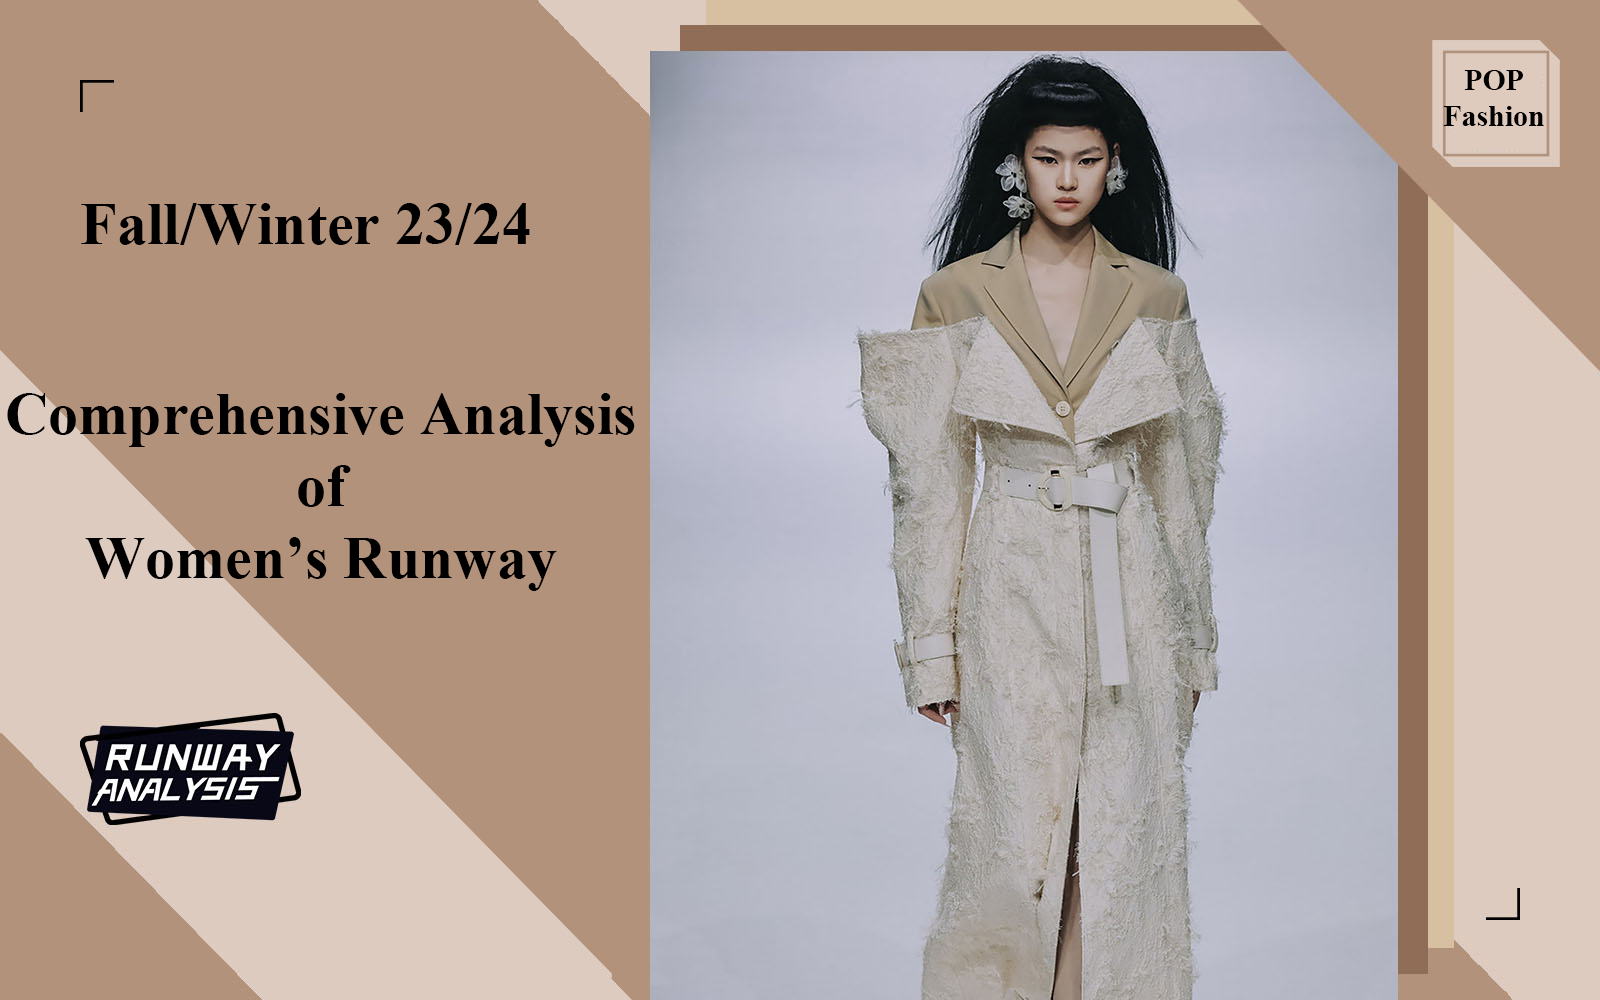 Detail -- A/W 23/24 Comprehensive Analysis of Women's Runway